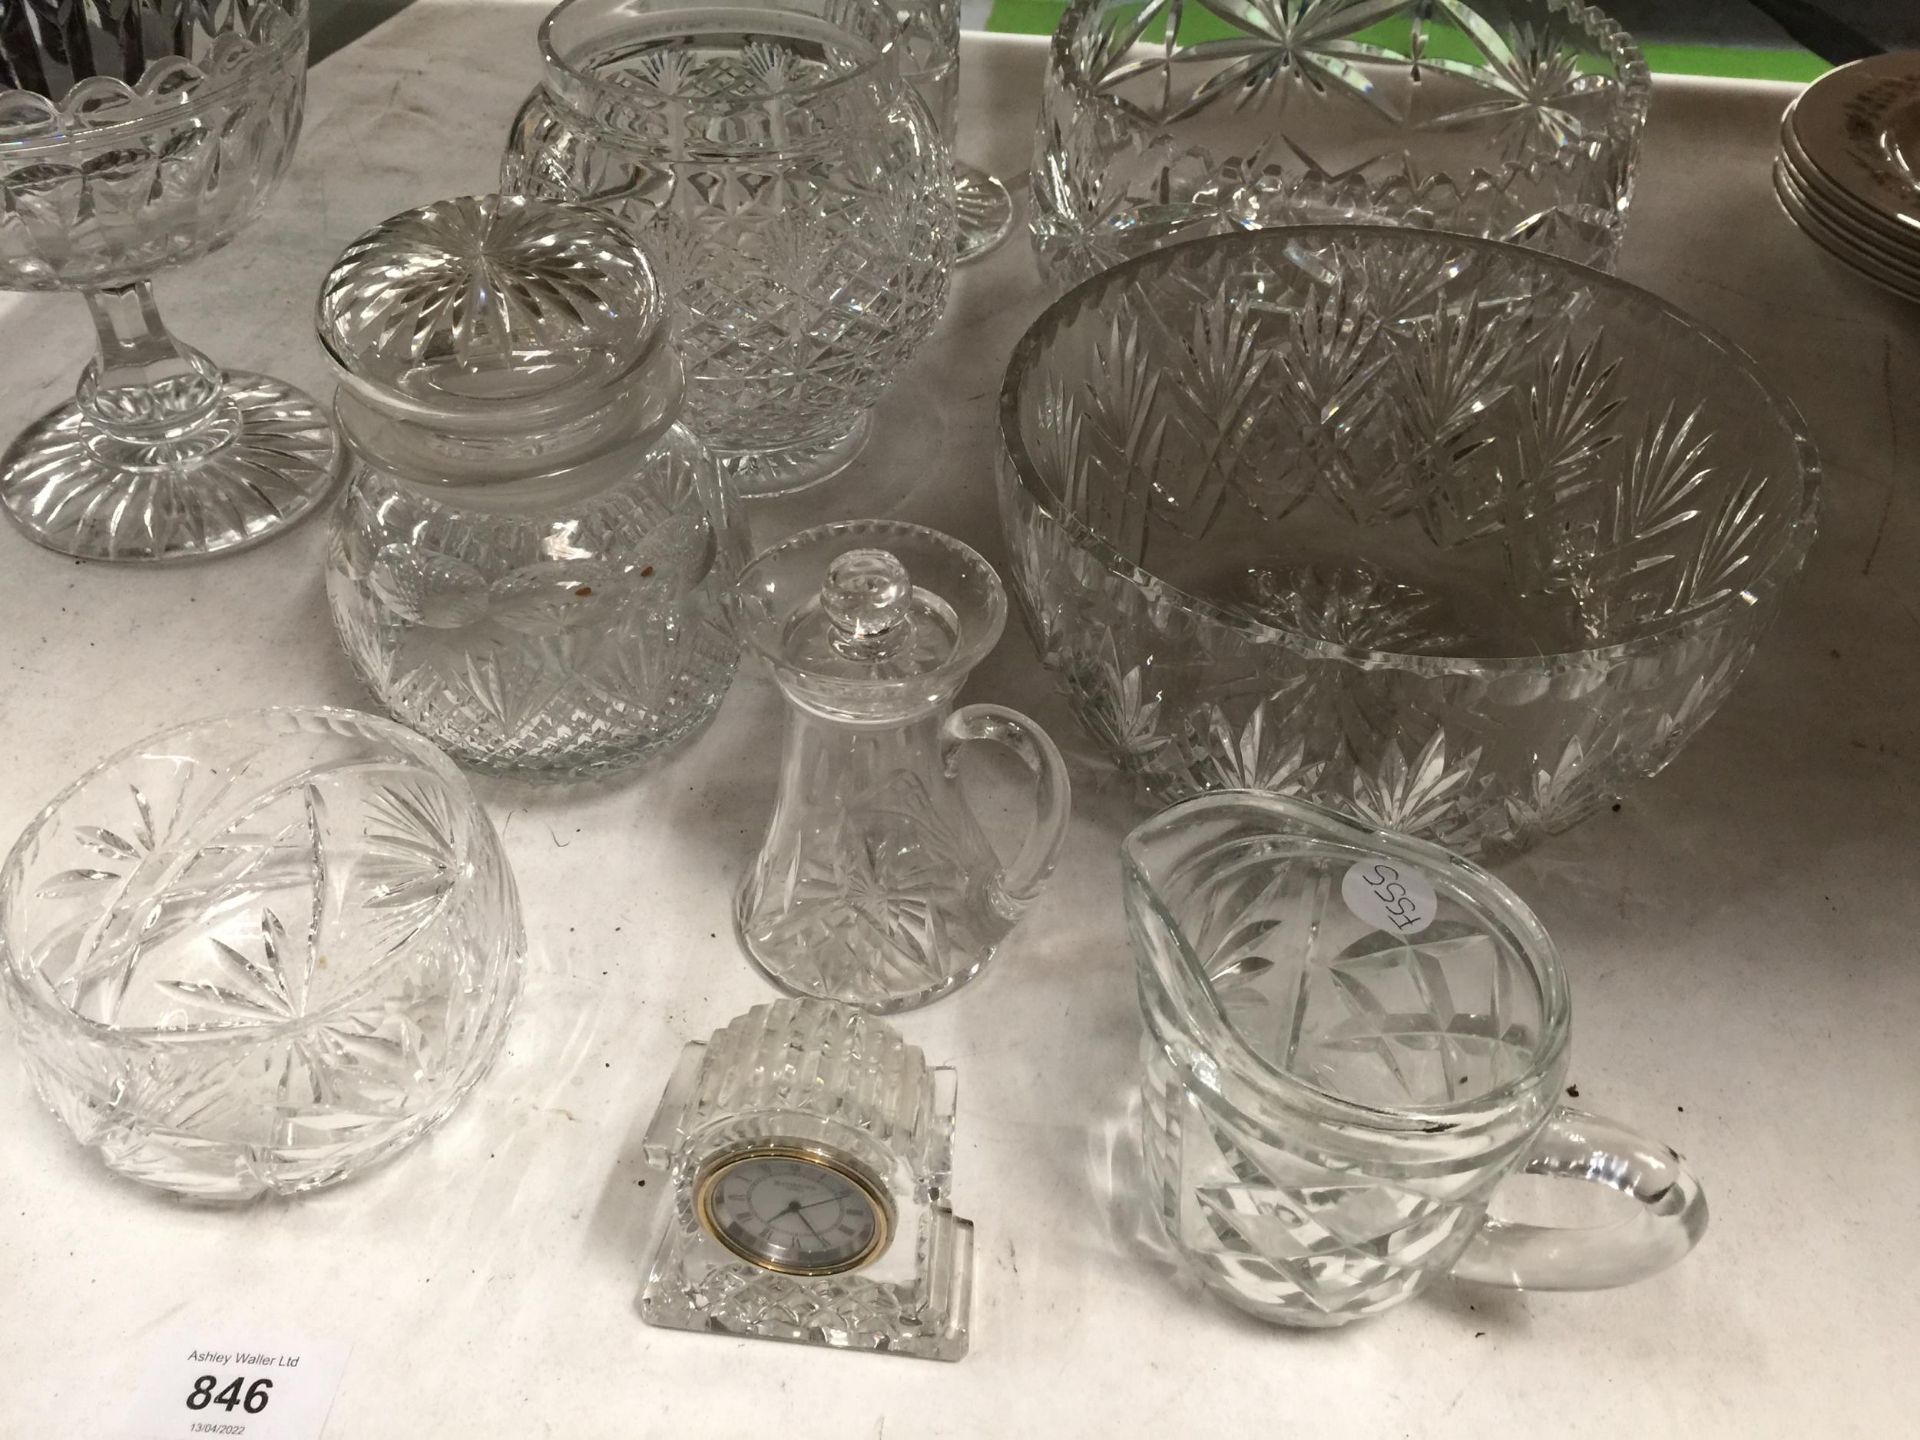 A QUANTITY OF GLASSWARE TO INCLUDE BOWLS, VASES, JUGS, ETC - Image 5 of 8